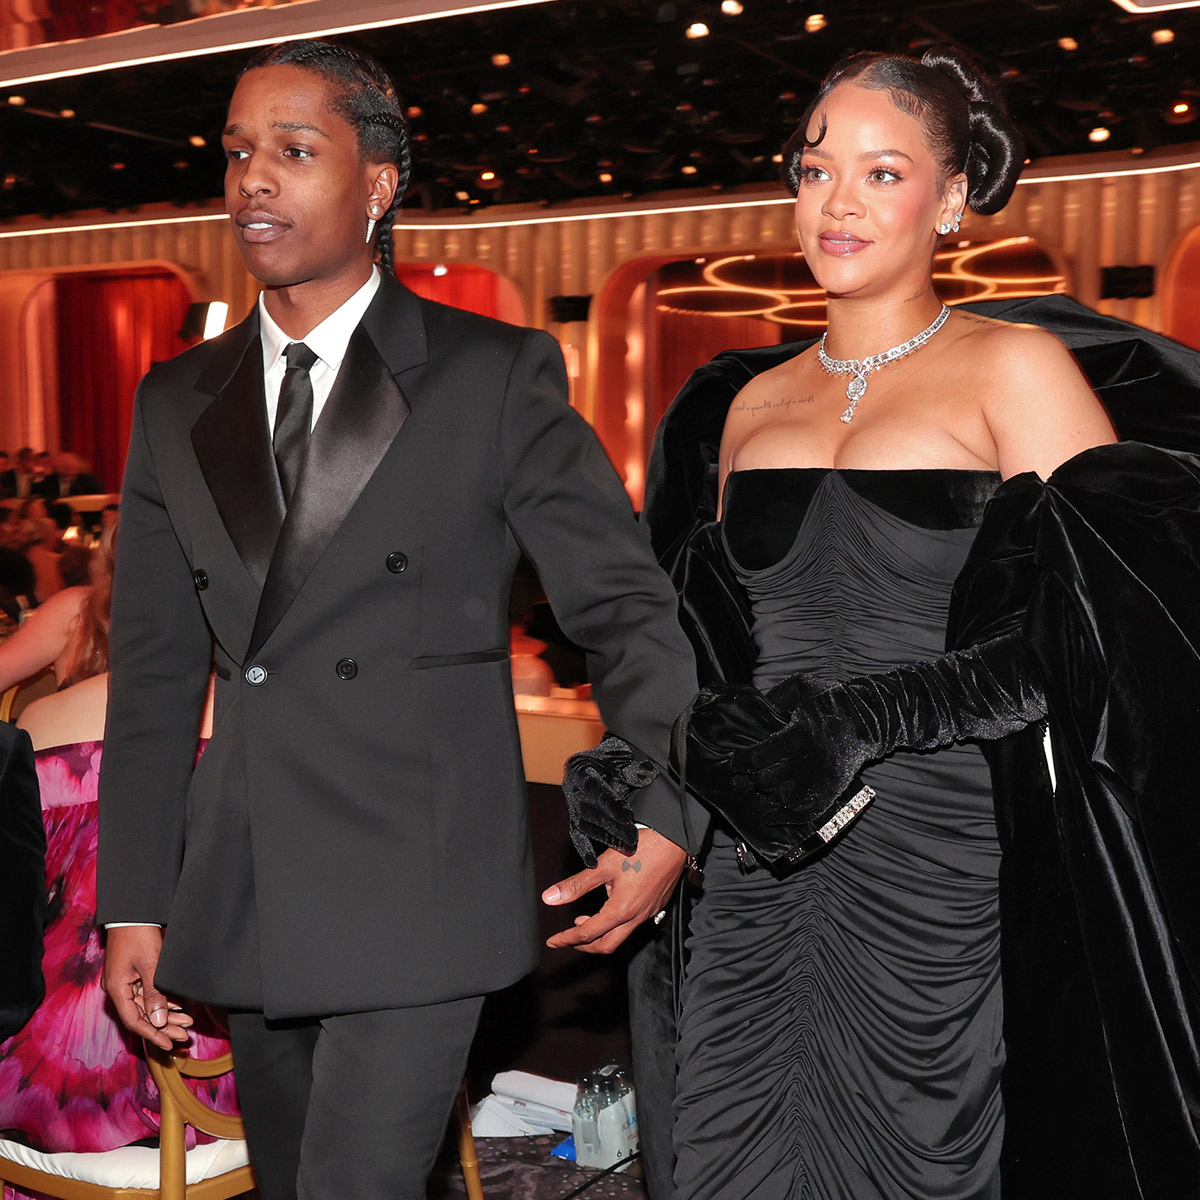 Rihanna and A$AP Rocky Get Cozy Together on the Set of a Music